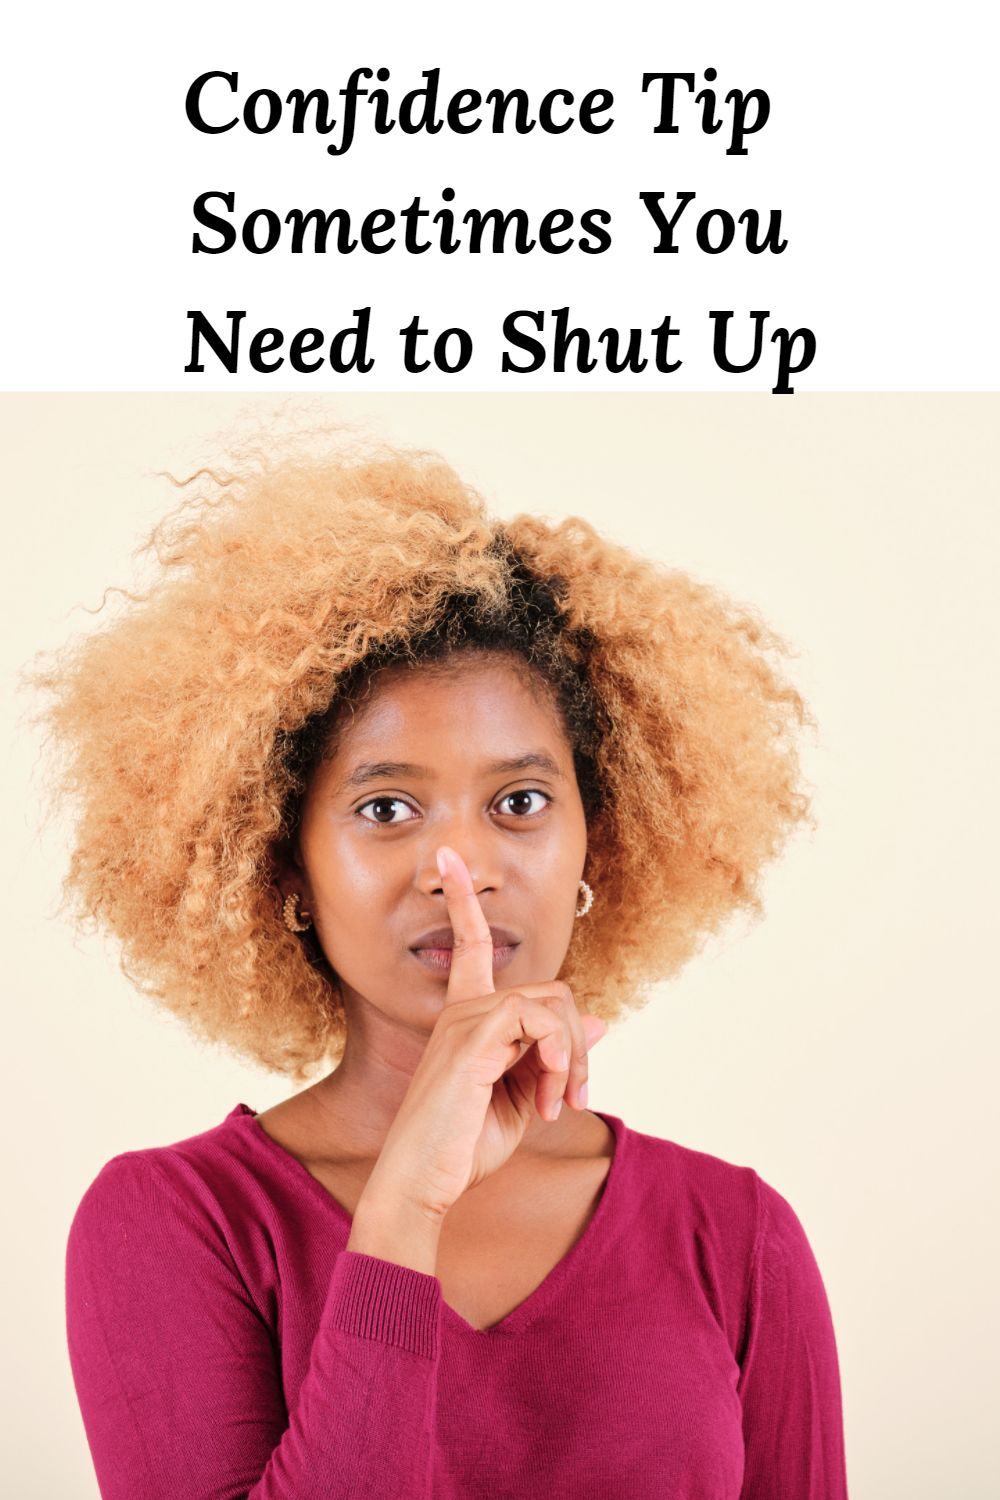 African American woman making the shush gesture and the words "Confidence Tip - Sometimes You Need to Shut Up"